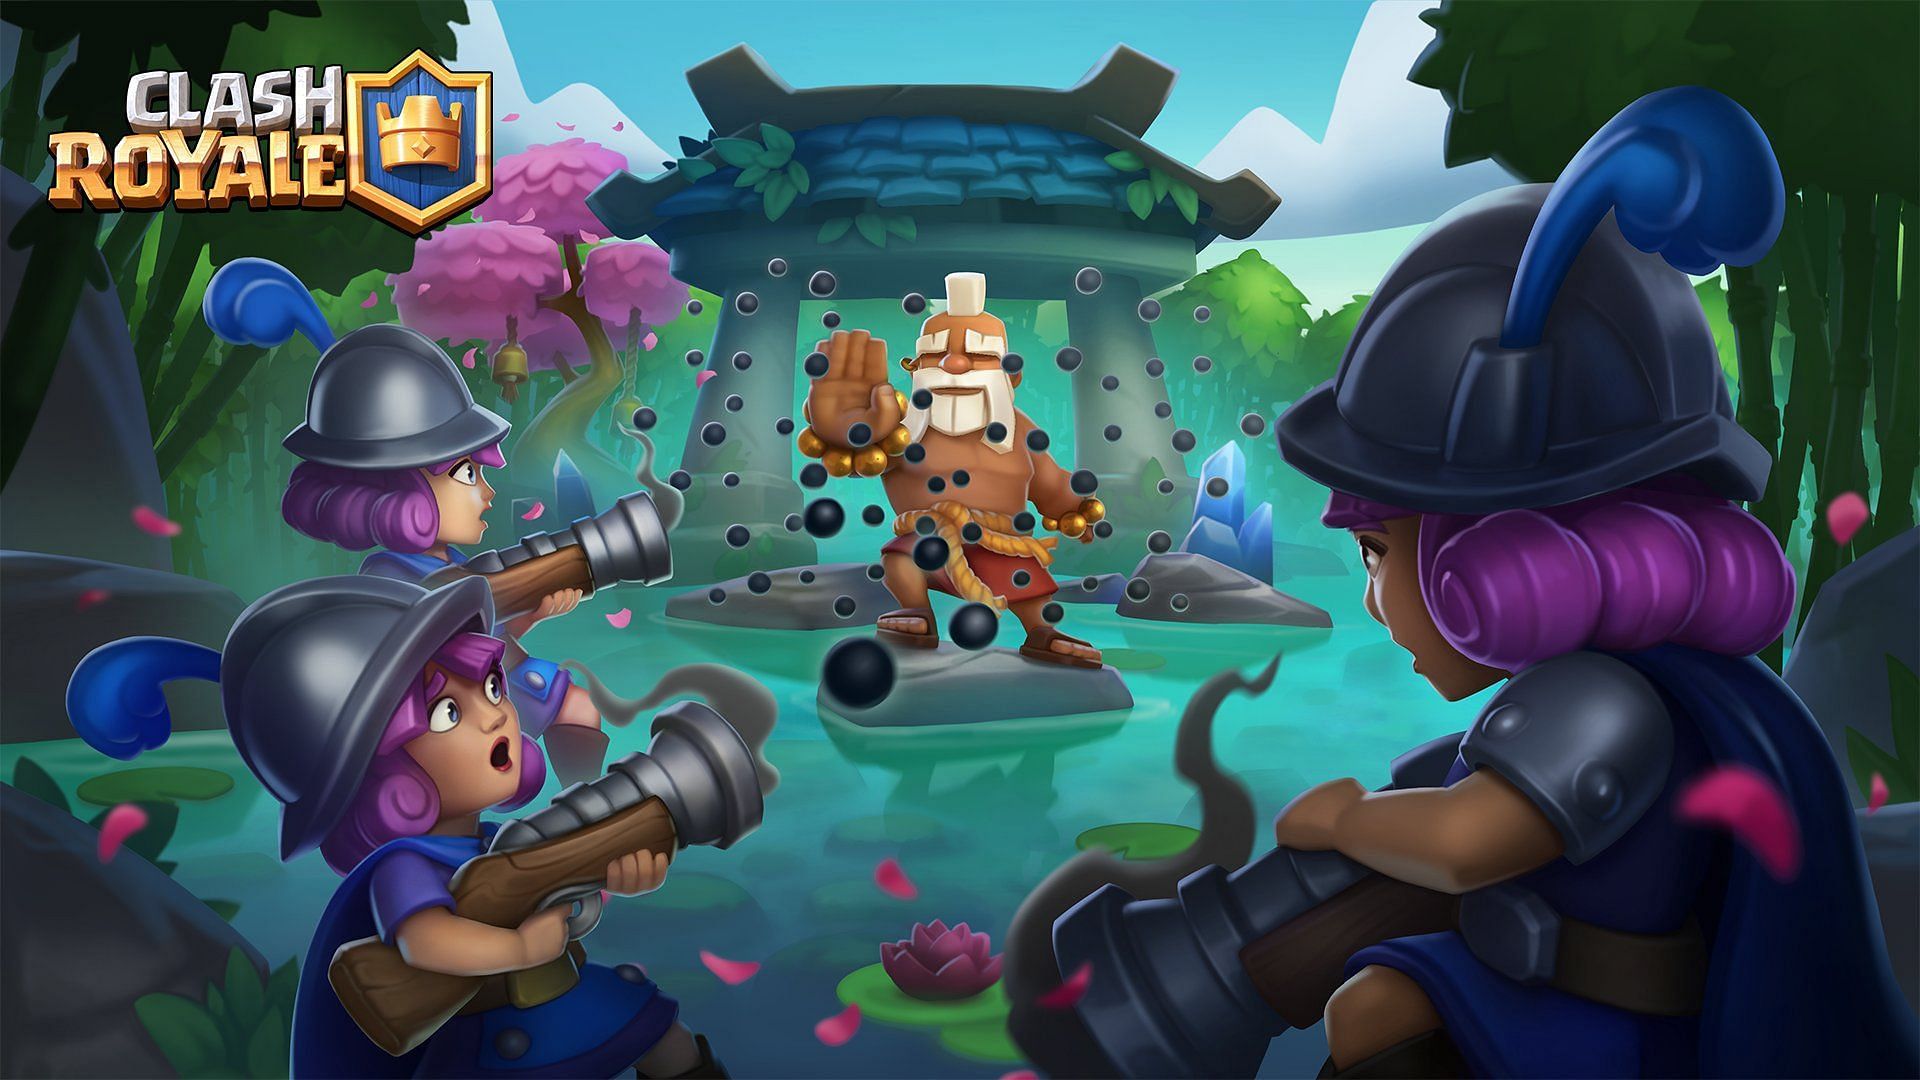 Official art (Image via Supercell)